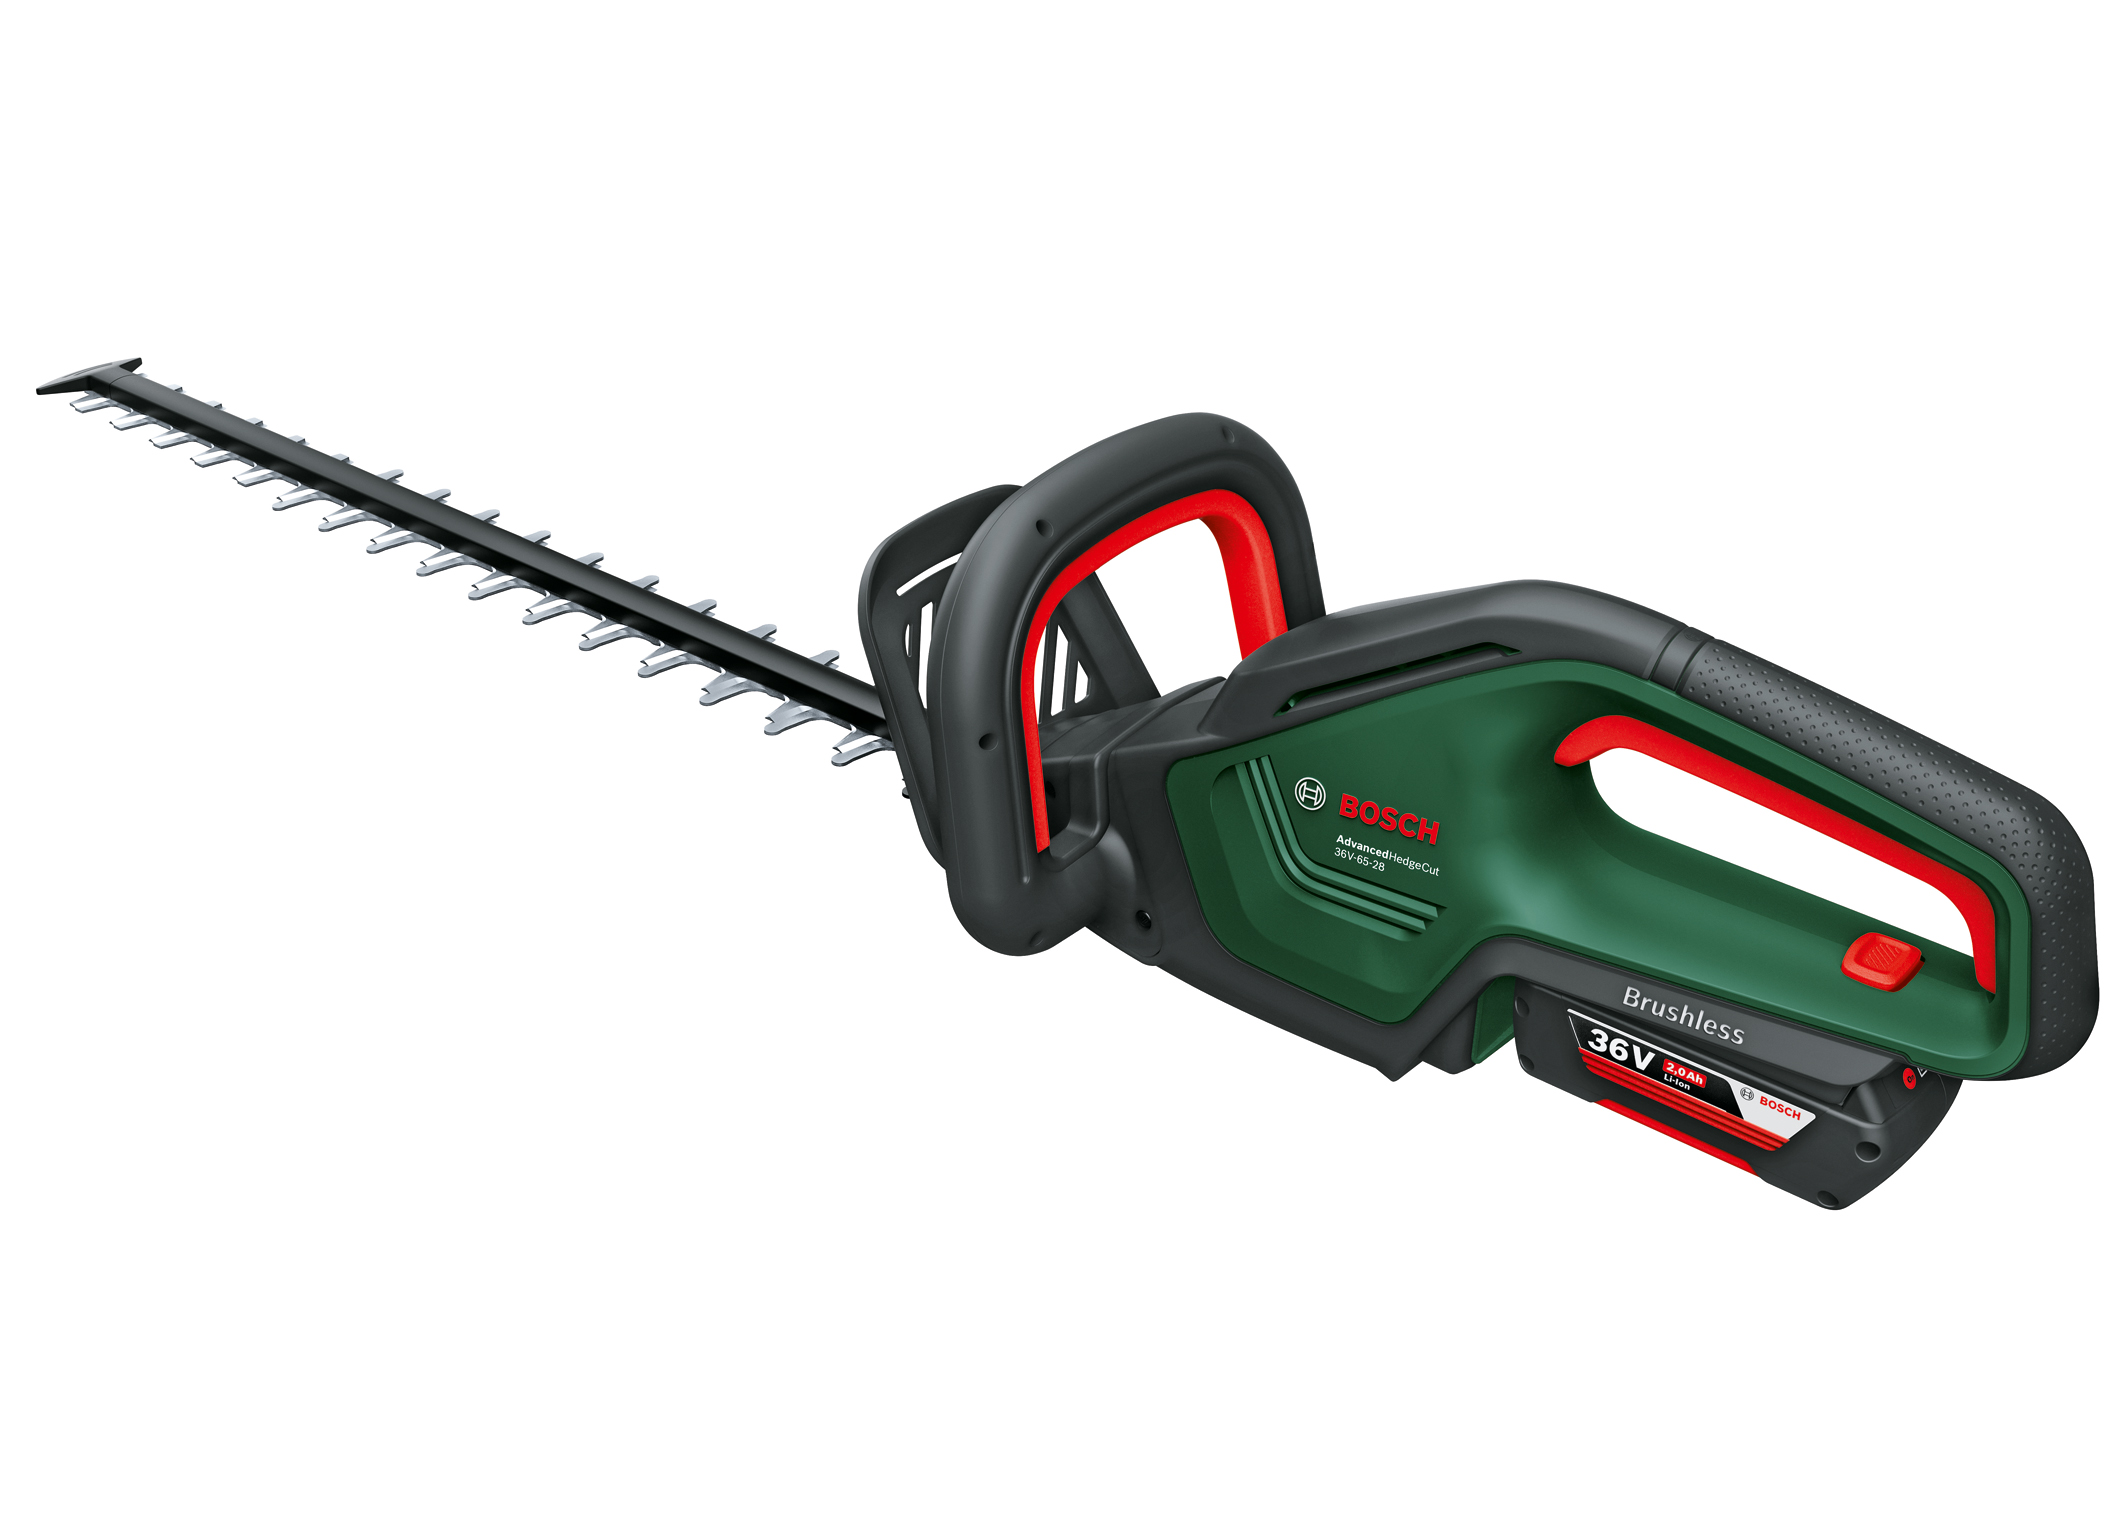 Expansion of the ‘36V Power for All System’: AdvancedHedgeCut 36V-65-28 cordless hedgecutter from Bosch